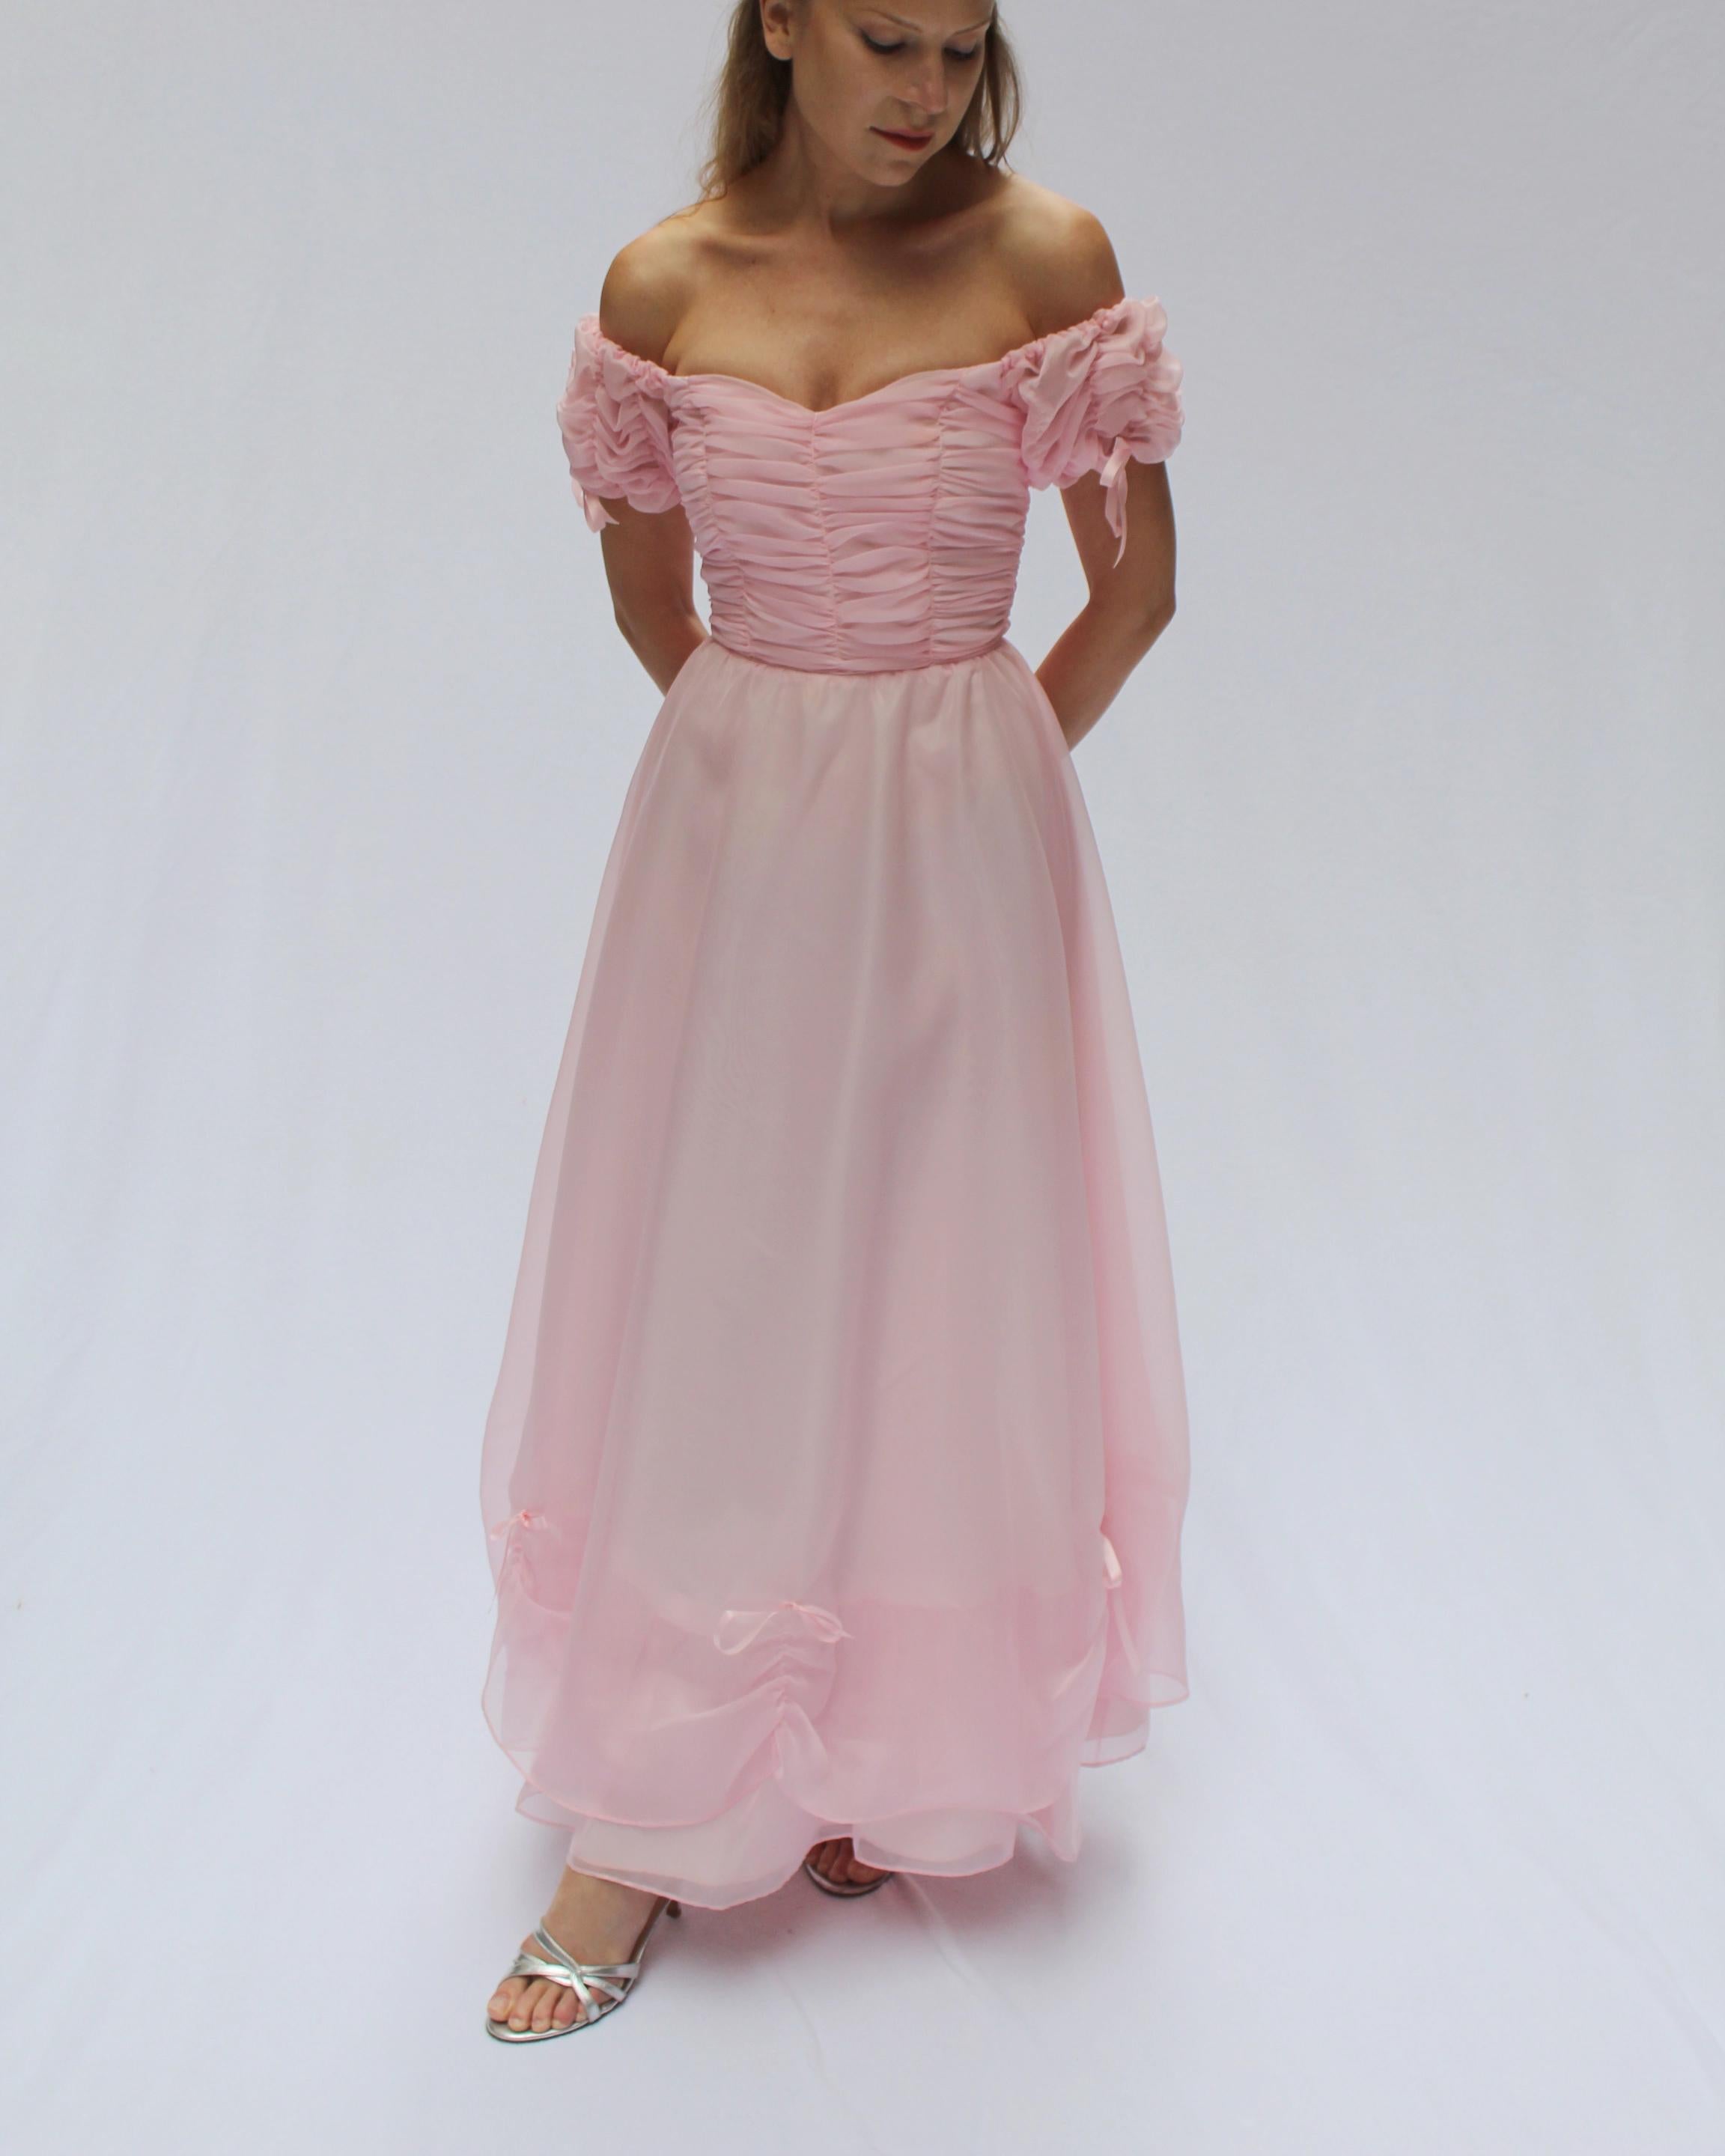 This dreamy vintage off-the-shoulder ballgown is a princess moment brought to life, in the sweetest shade of cotton candy pink. The stunning corseted bodice (with boned interior) is gathered in tiers for the most romantic look. The full skirt